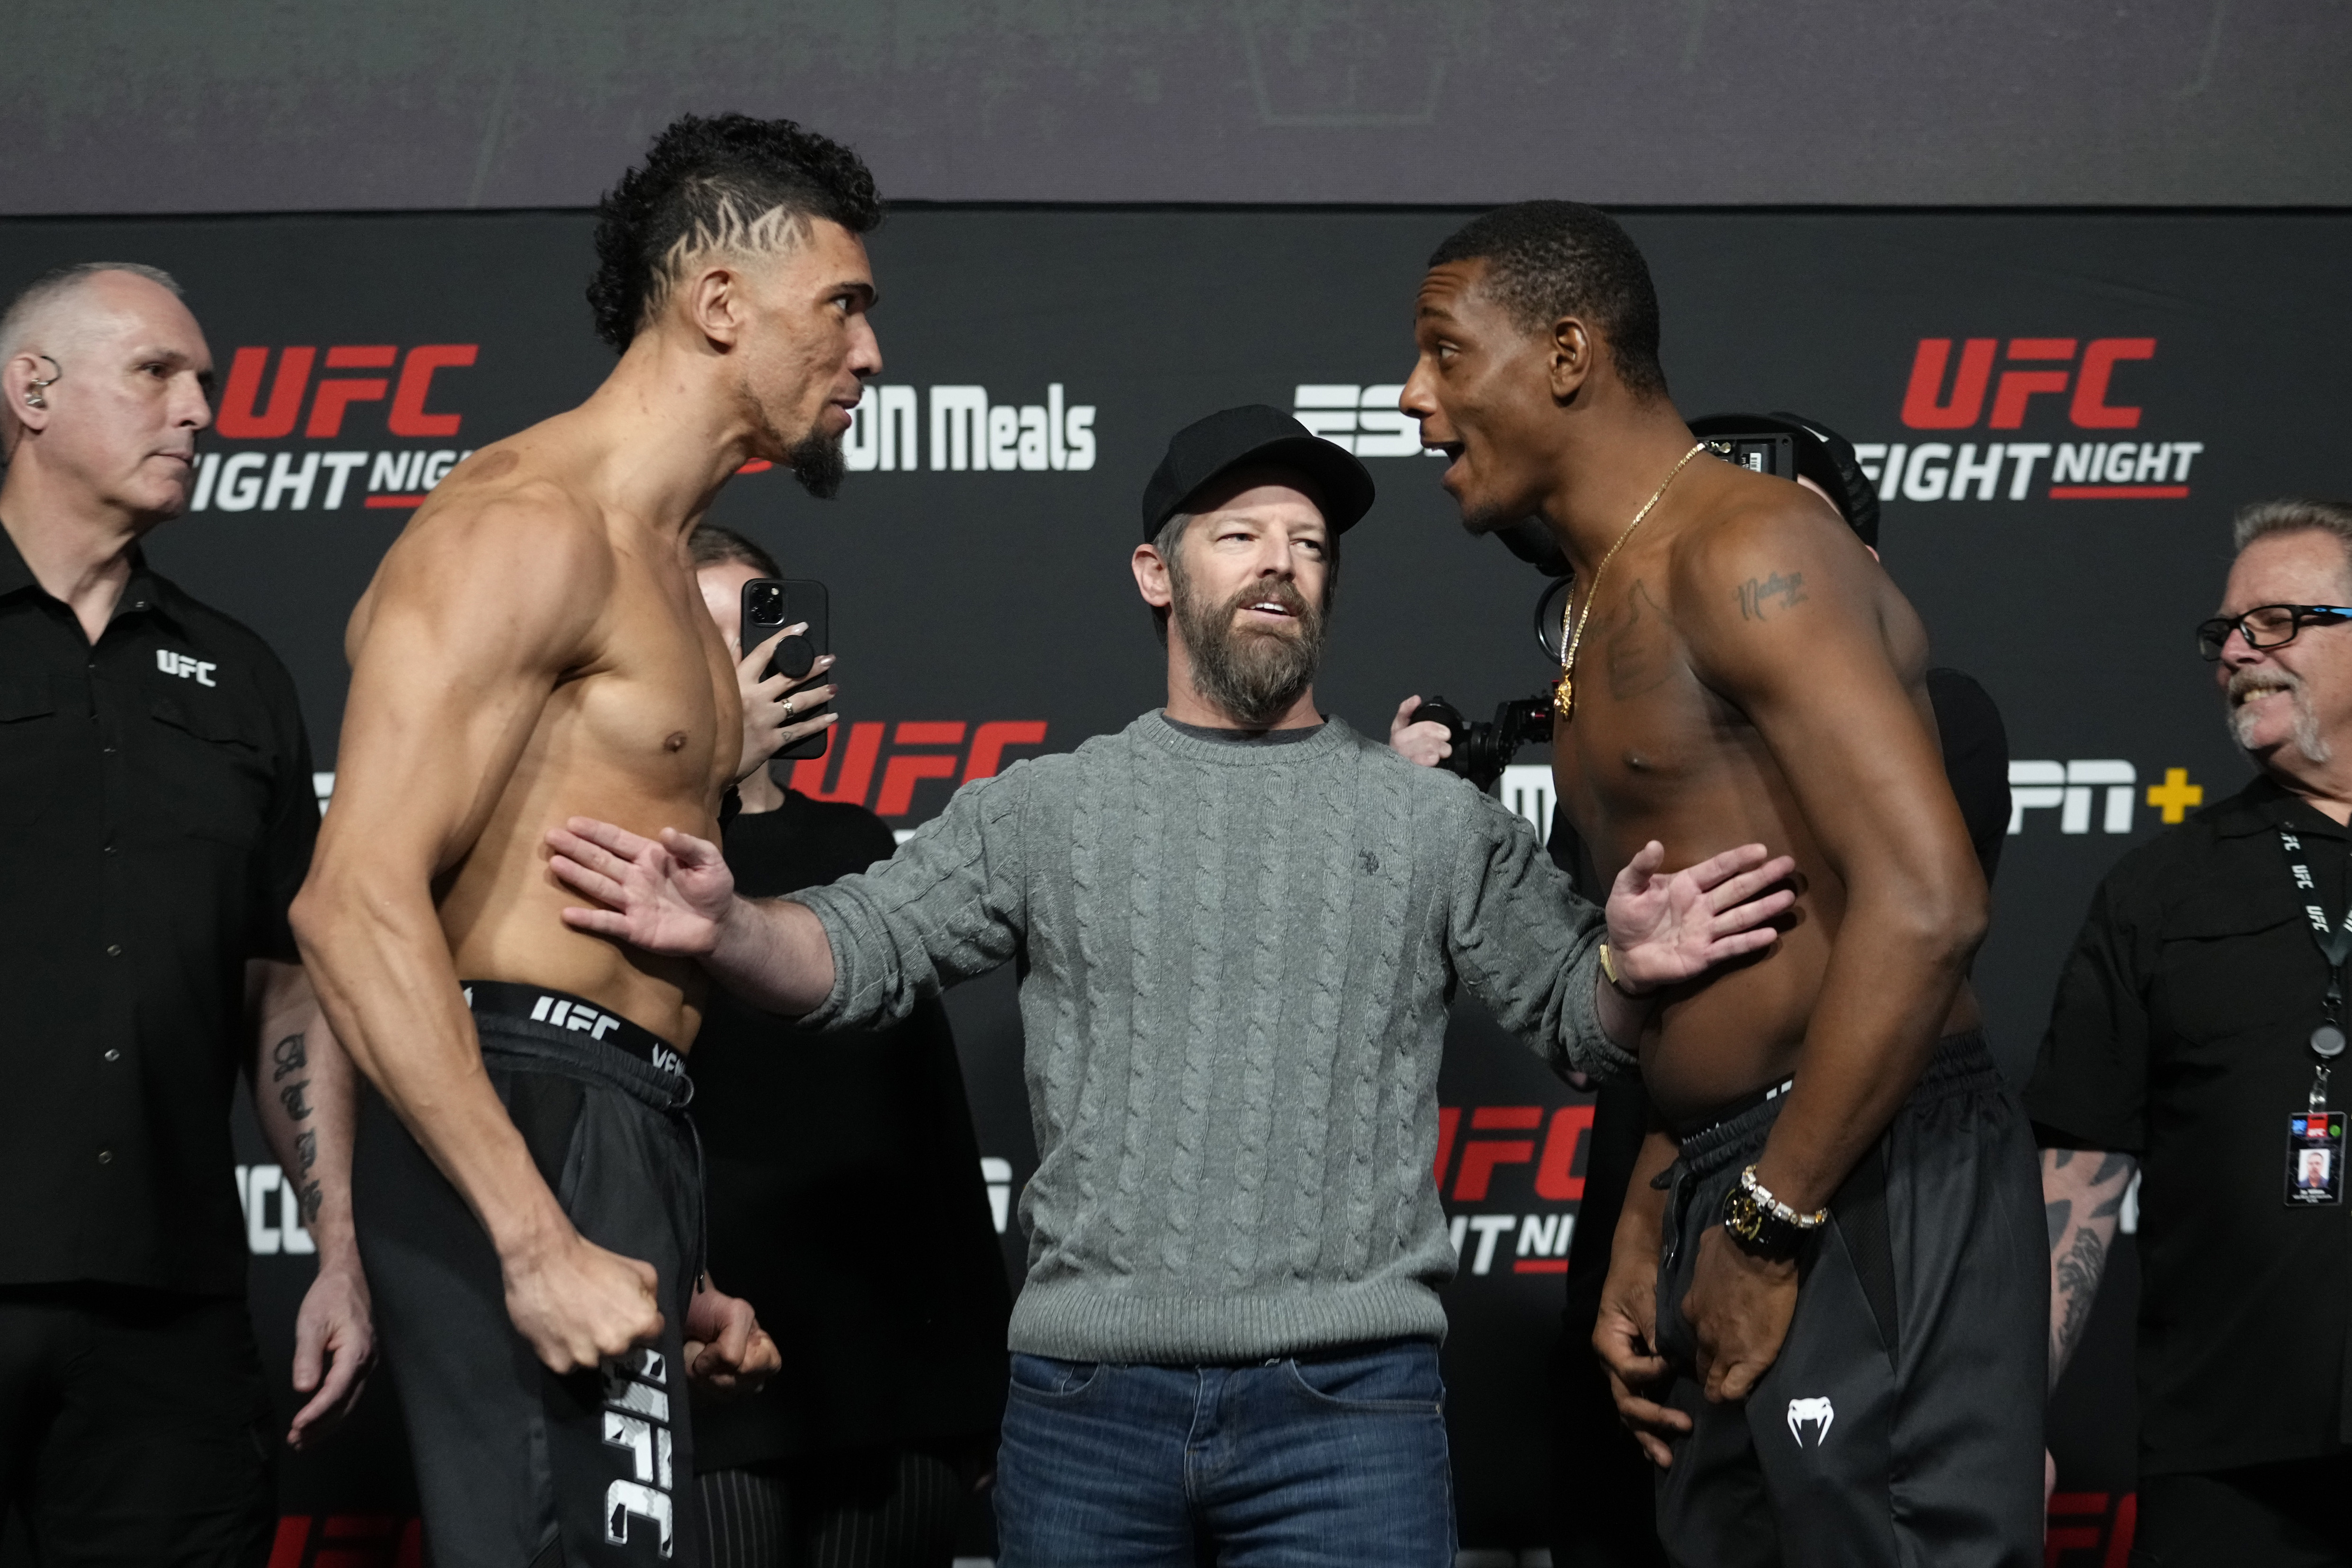 Johnny Walker of Brazil and Jamahal Hill face off during the UFC Fight Night weigh-in at UFC APEX on February 18, 2022 in Las Vegas, Nevada.